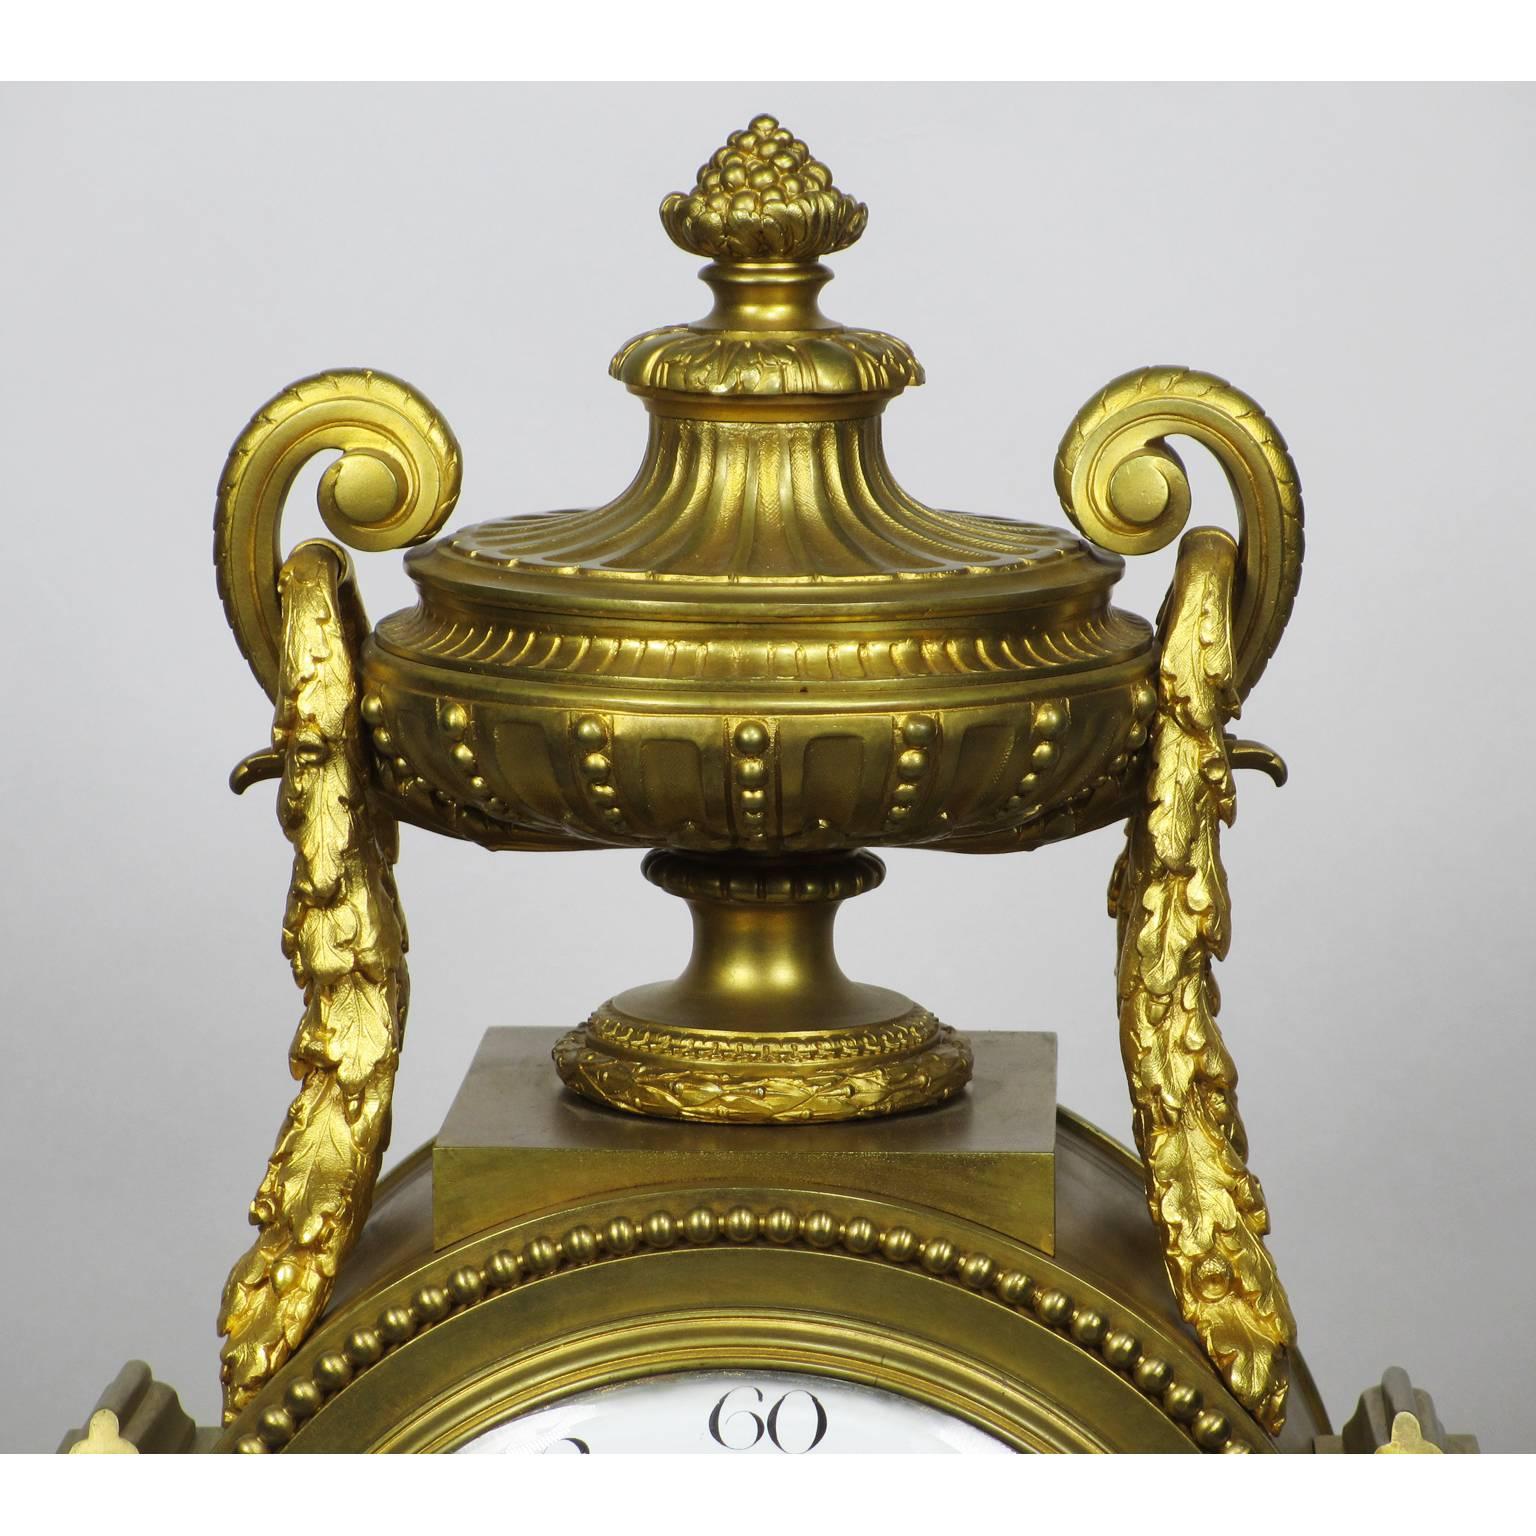 French 19th Century Louis XVI Style Gilt Bronze Mantel Clock by Lemerle Charpentier For Sale